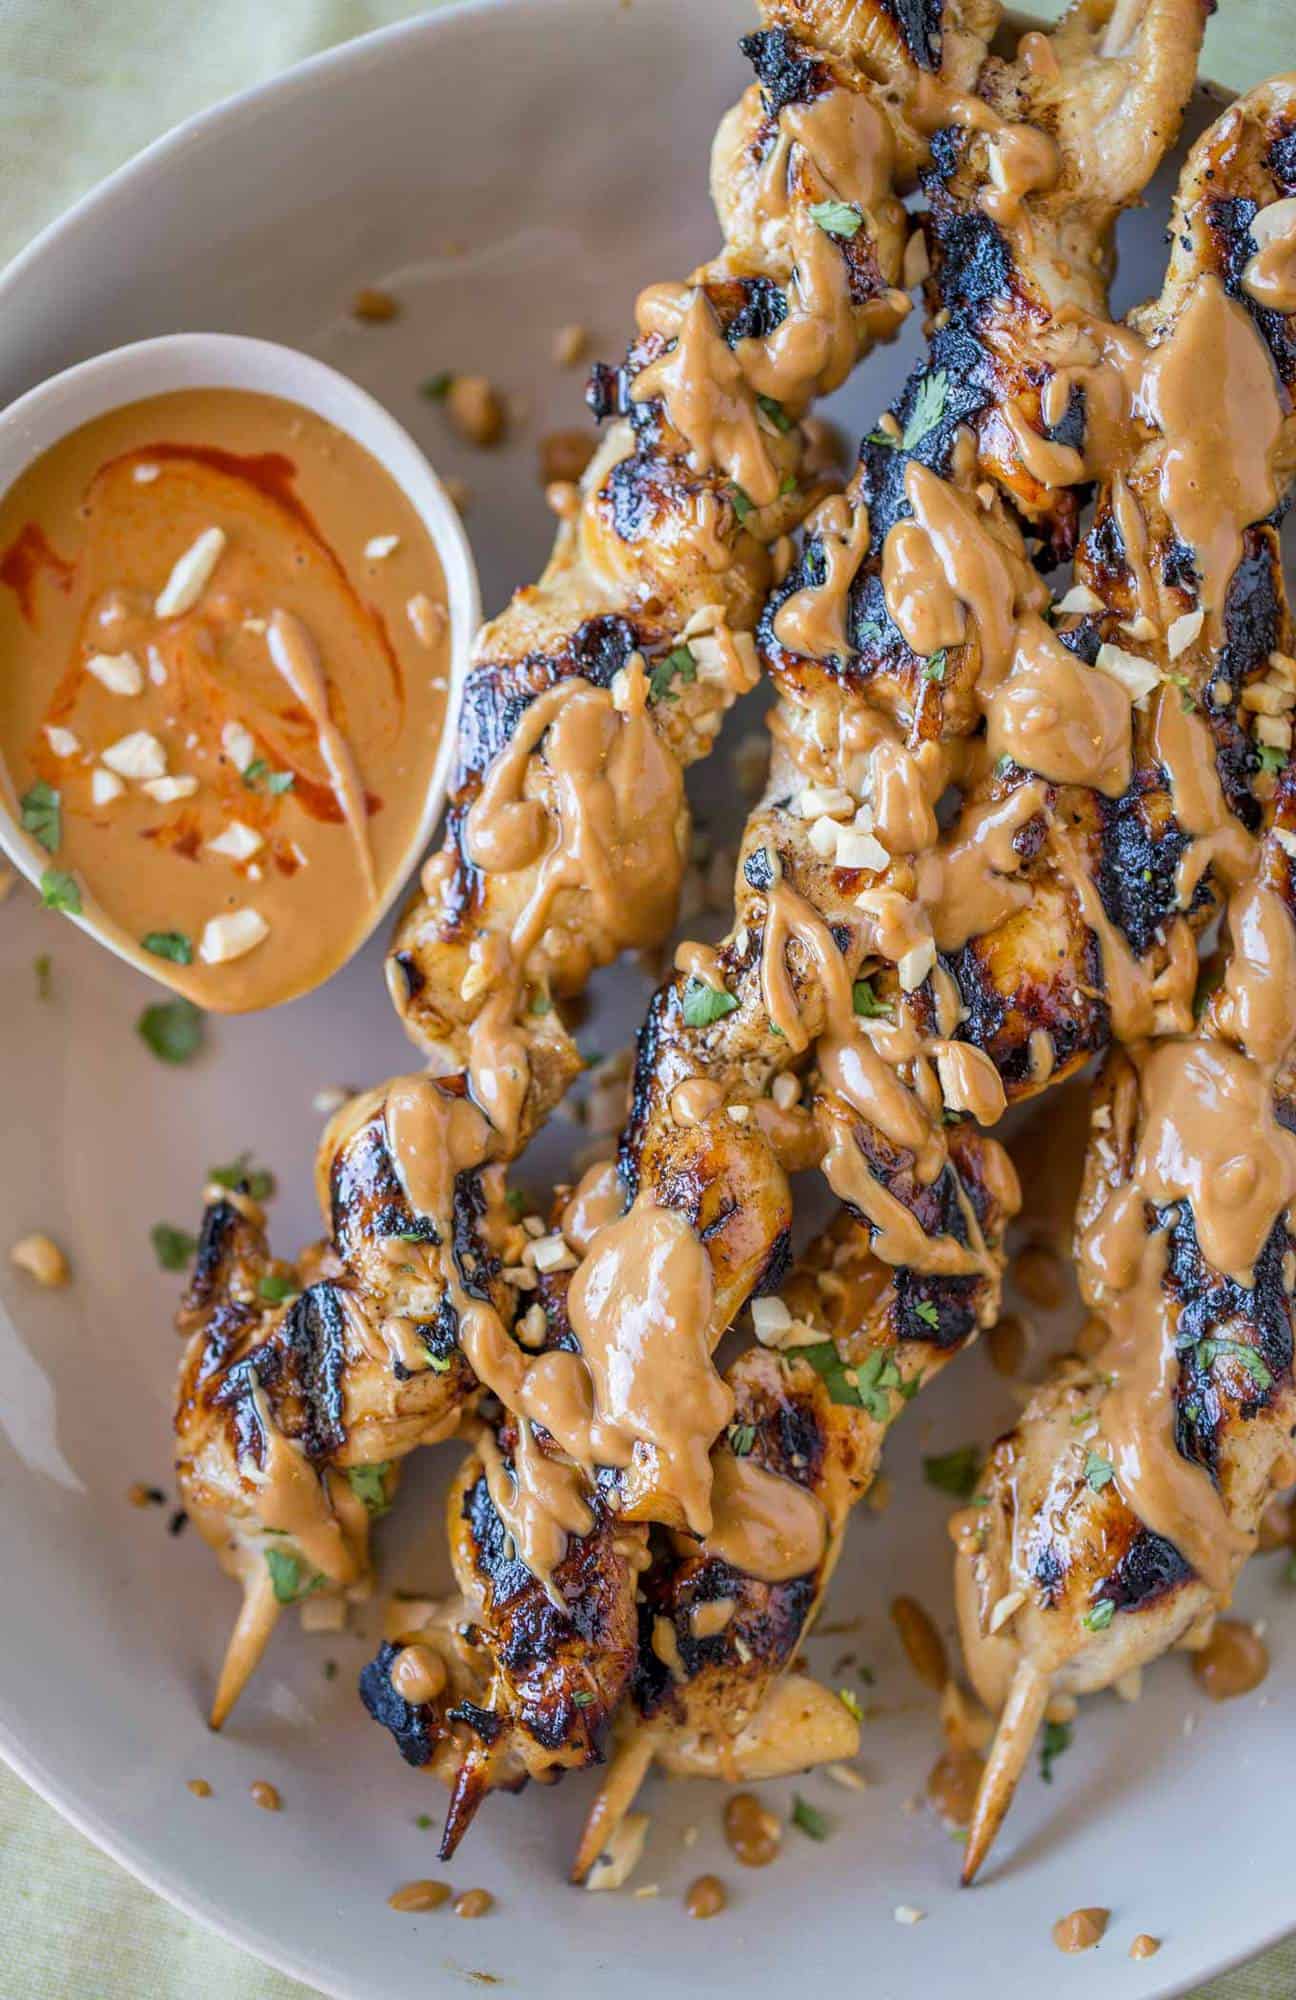 Chicken Satay skewers with the easiest peanut sauce is both authentic and approachable for kids too! So delicious you'll skip the Thai food delivery!